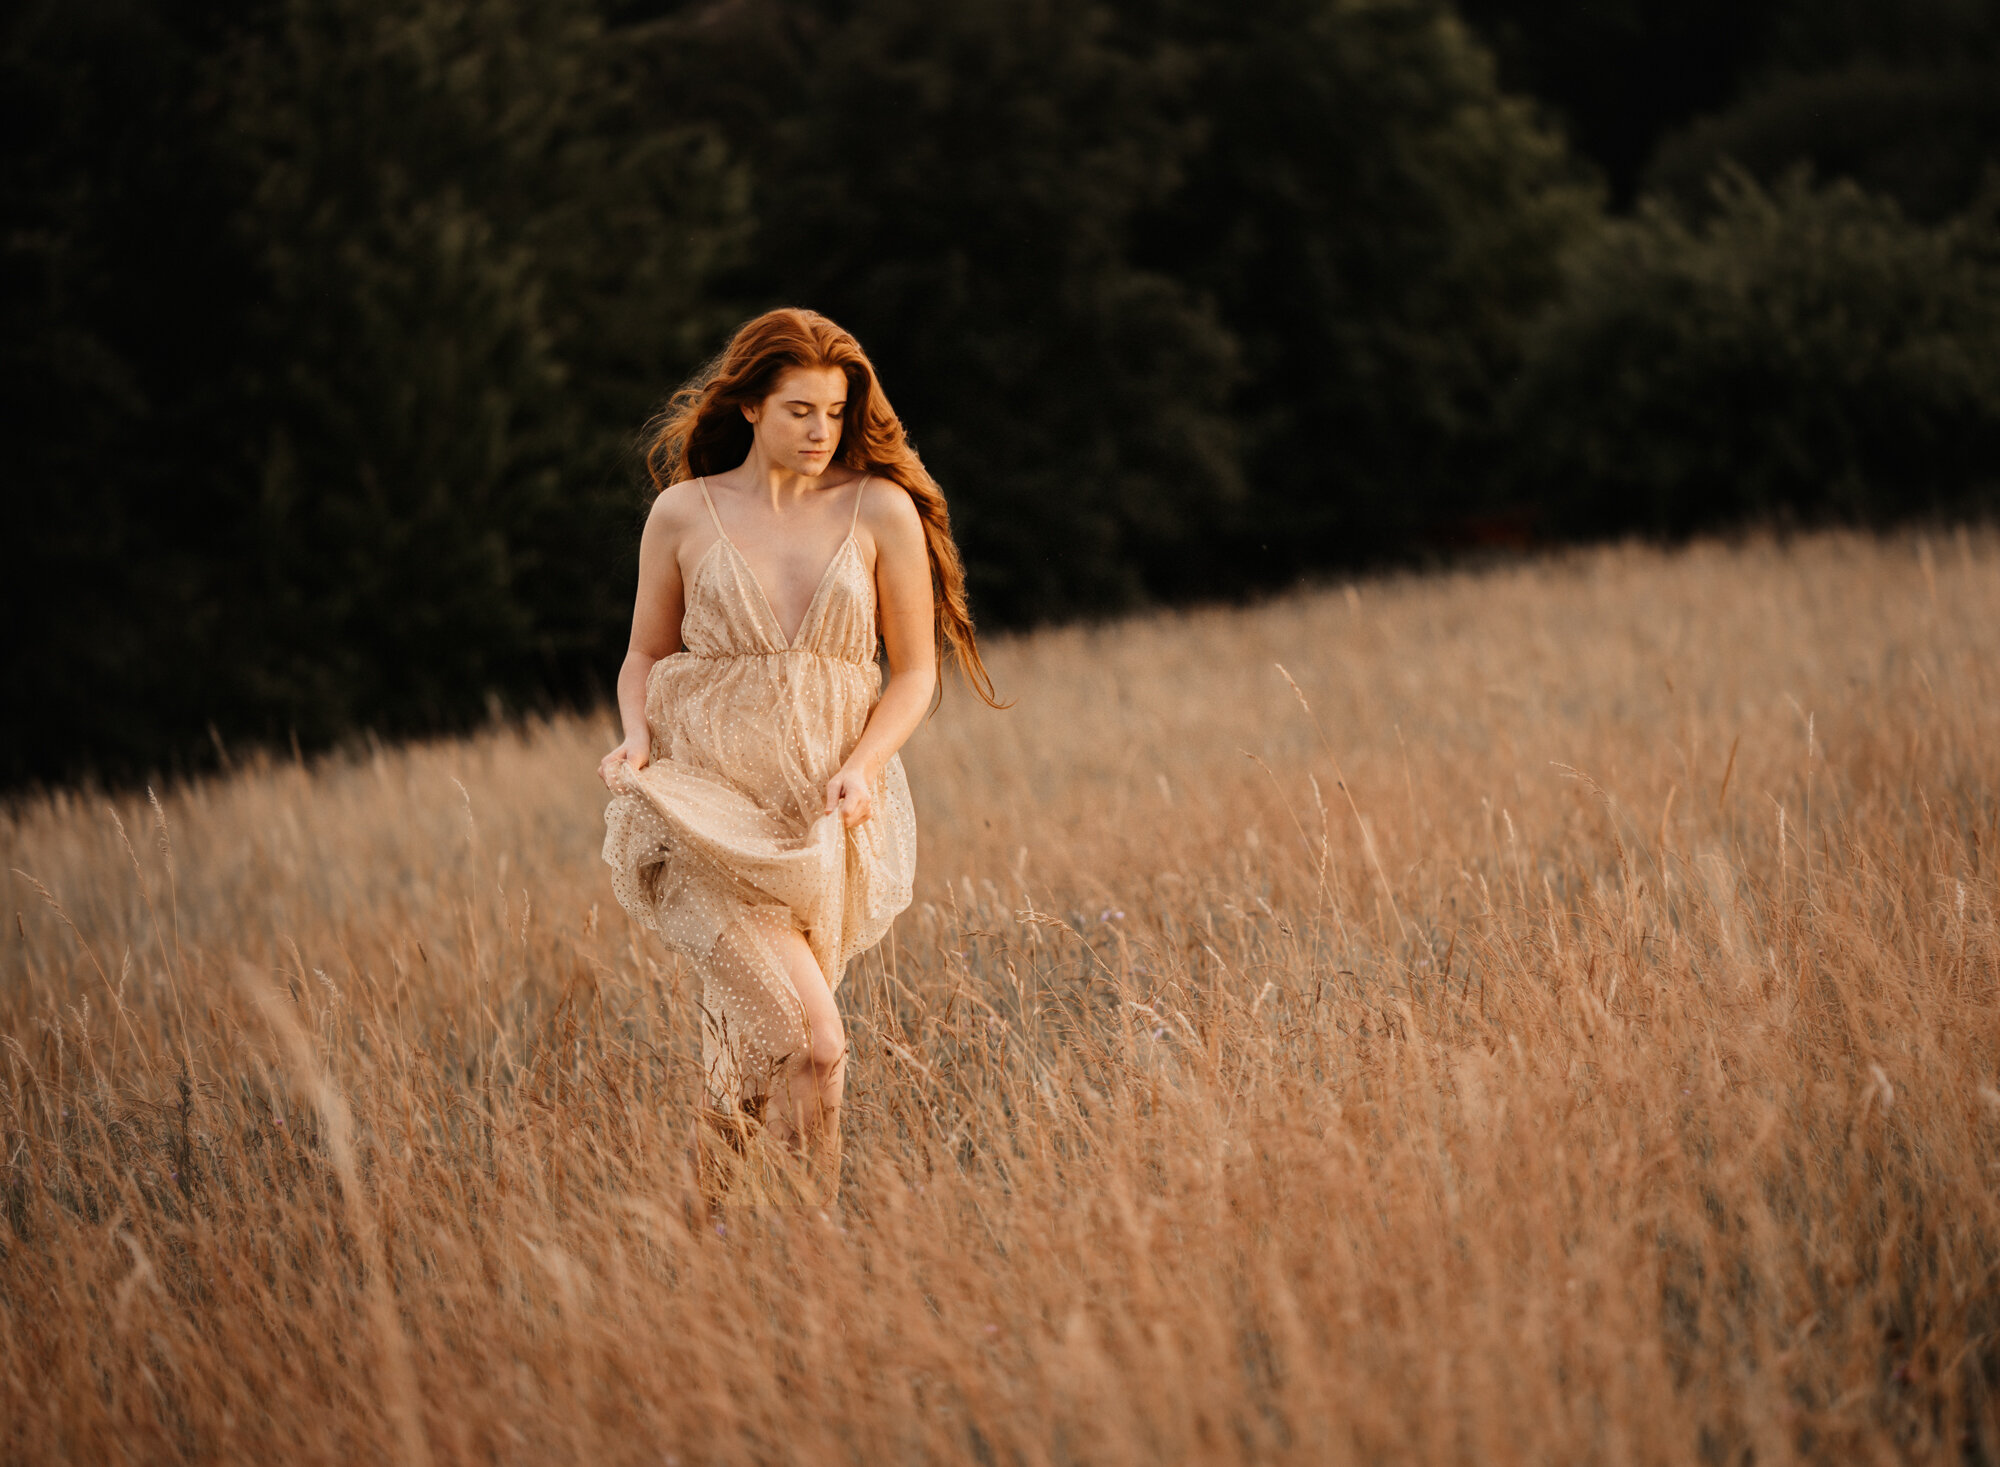  Young red head girl wearing a gold sparkling dress in a wild flower field in summer during sunset for her fine art portrait photo session by ramstein kmc photographer sarah havens, Kaiserslautern Germany - running through the field   